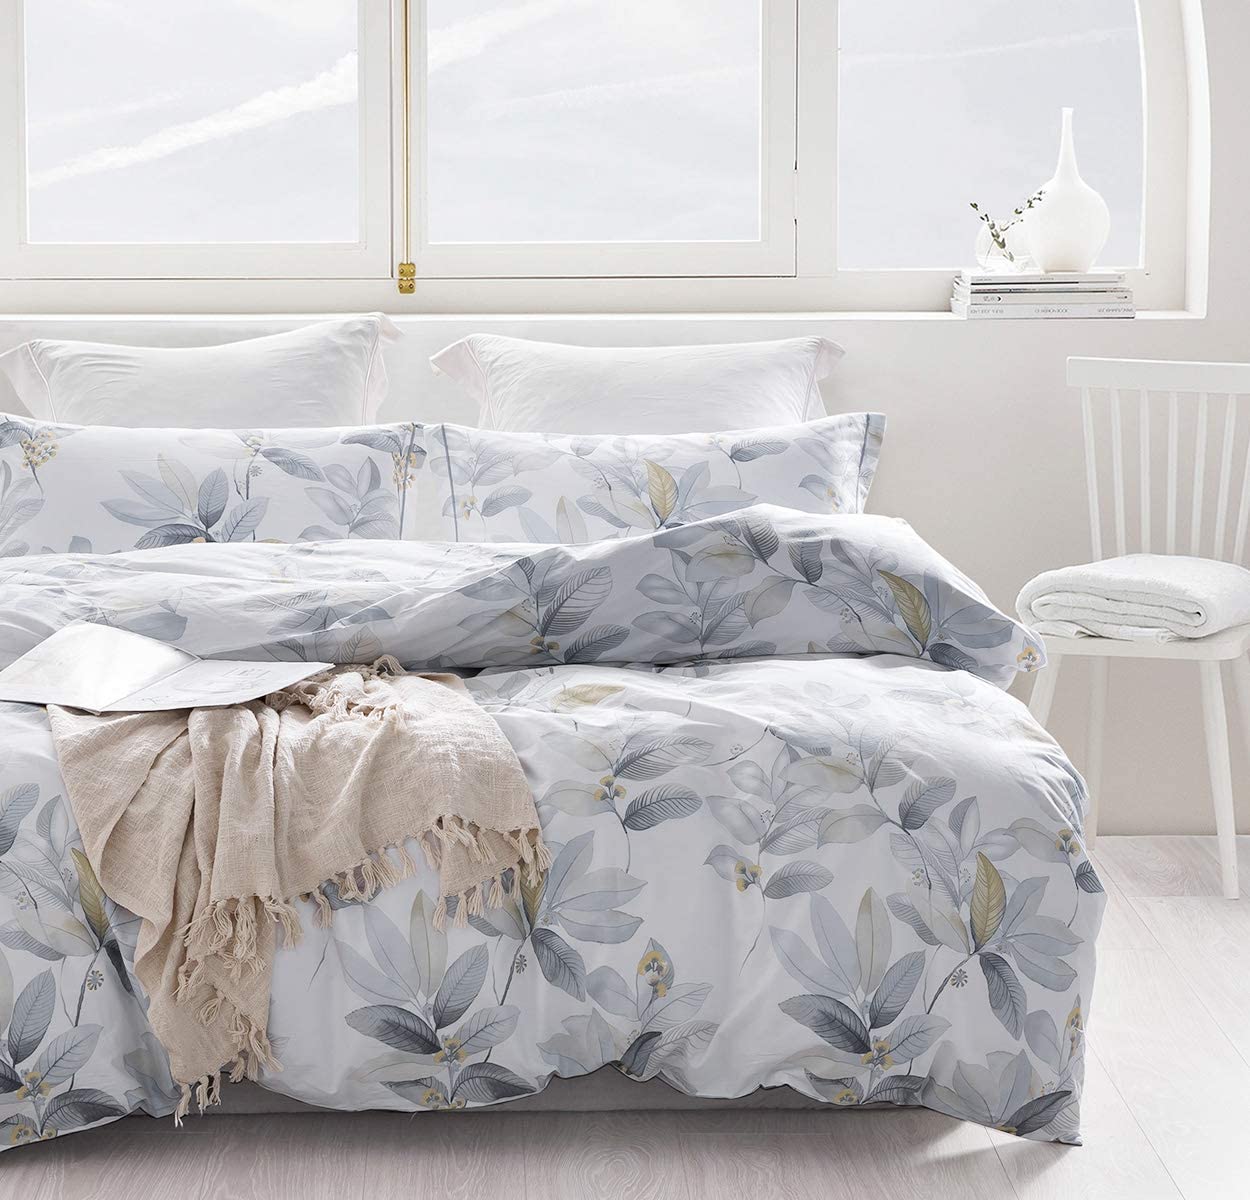 Details about   SLEEPBELLA Queen Size Comforter Set Elegant Yellow Floral Pattern Printed on Off 